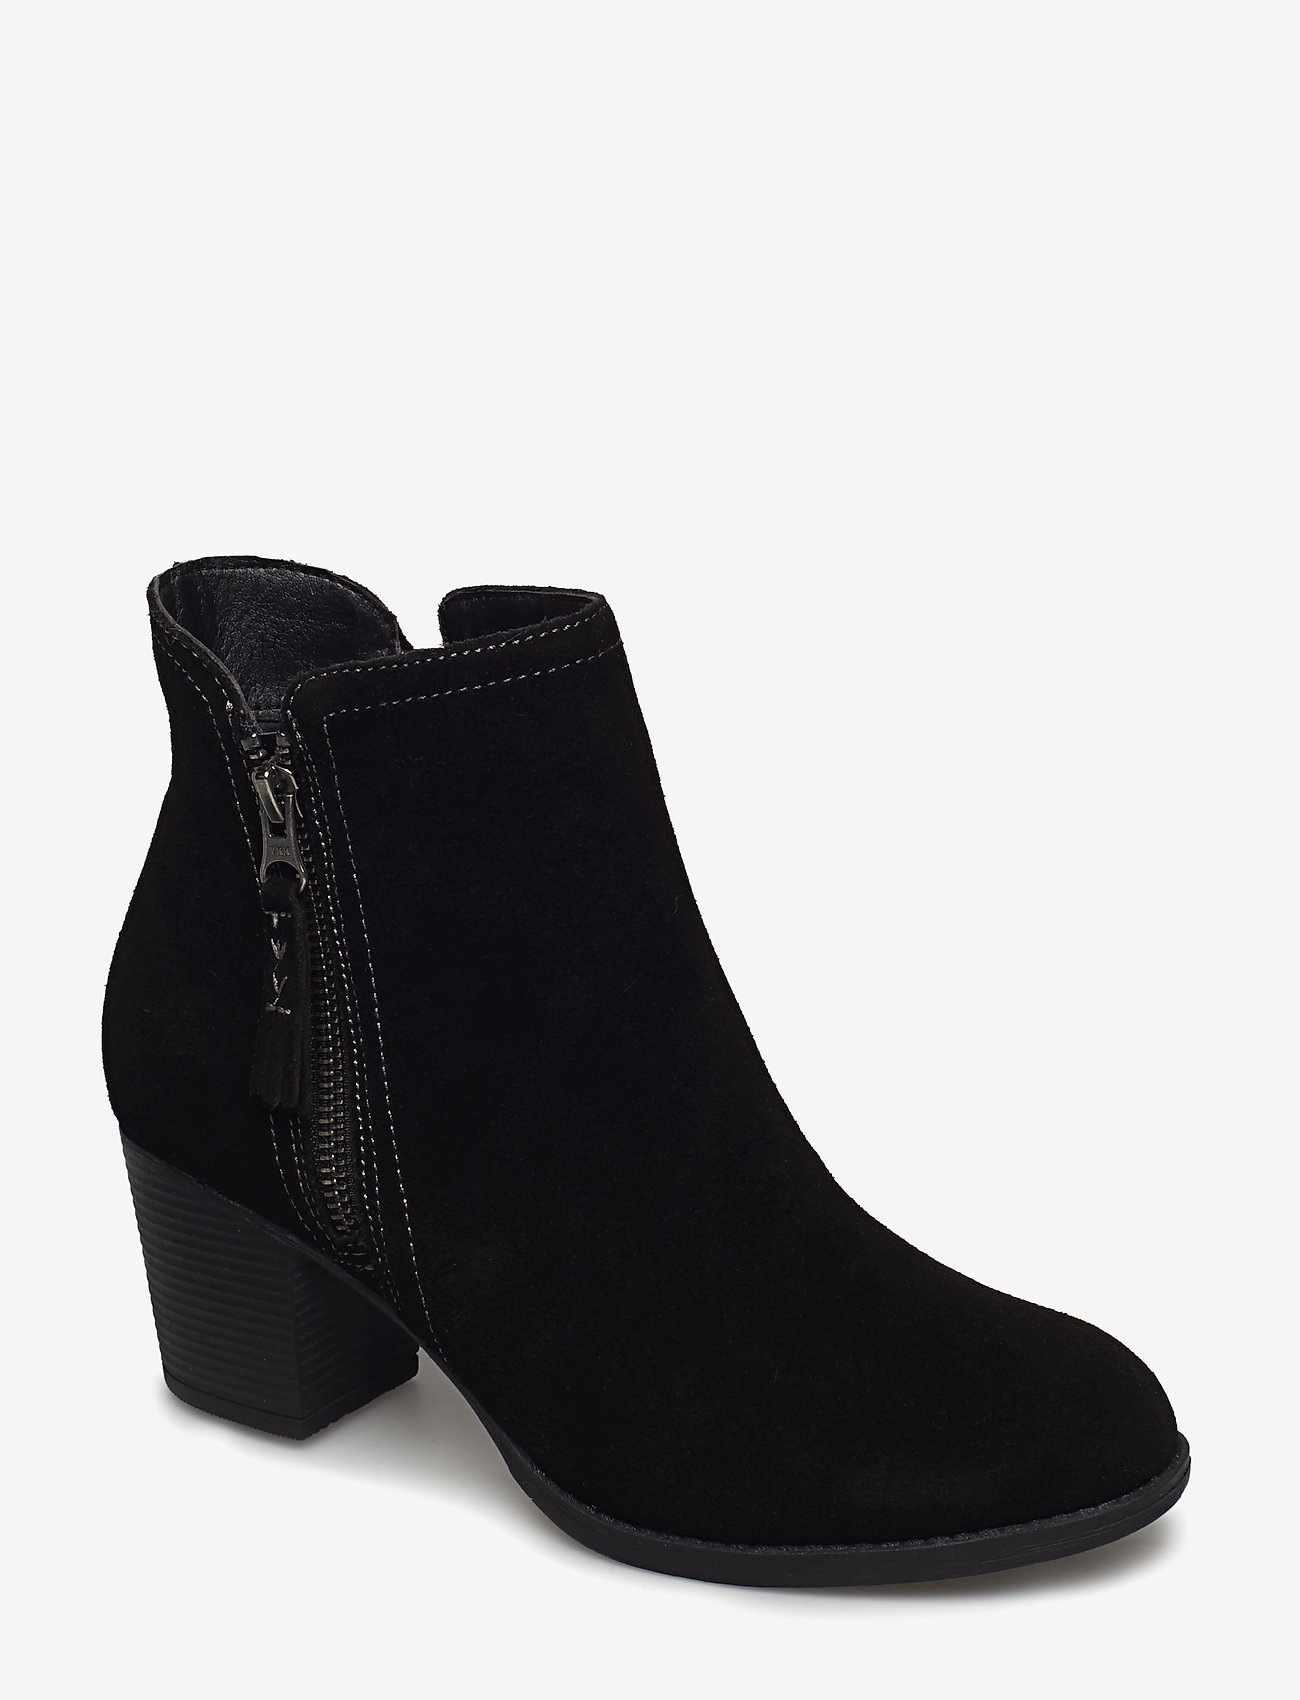 Skechers Womens Taxi - Accolade - Heeled ankle boots | Boozt.com